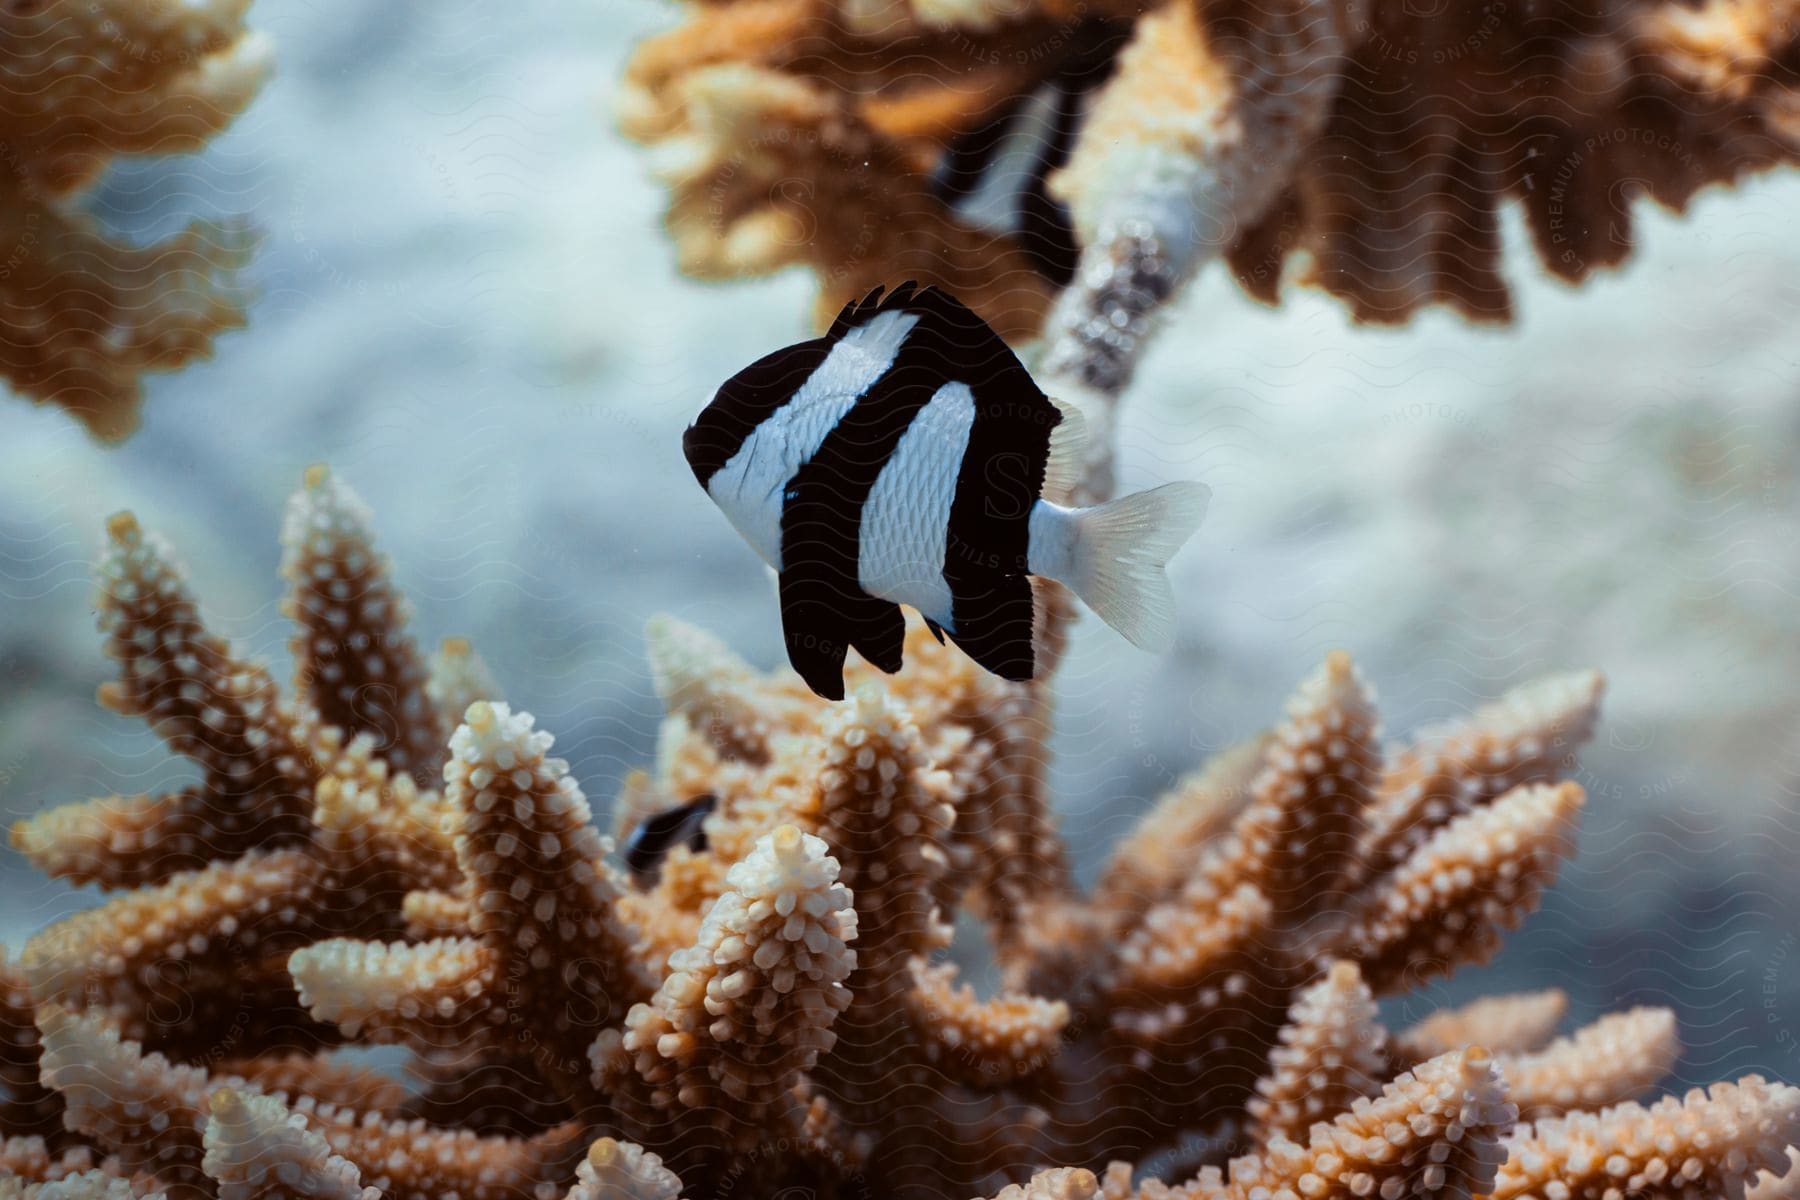 A fish swims close to coral plants in an underwater scene